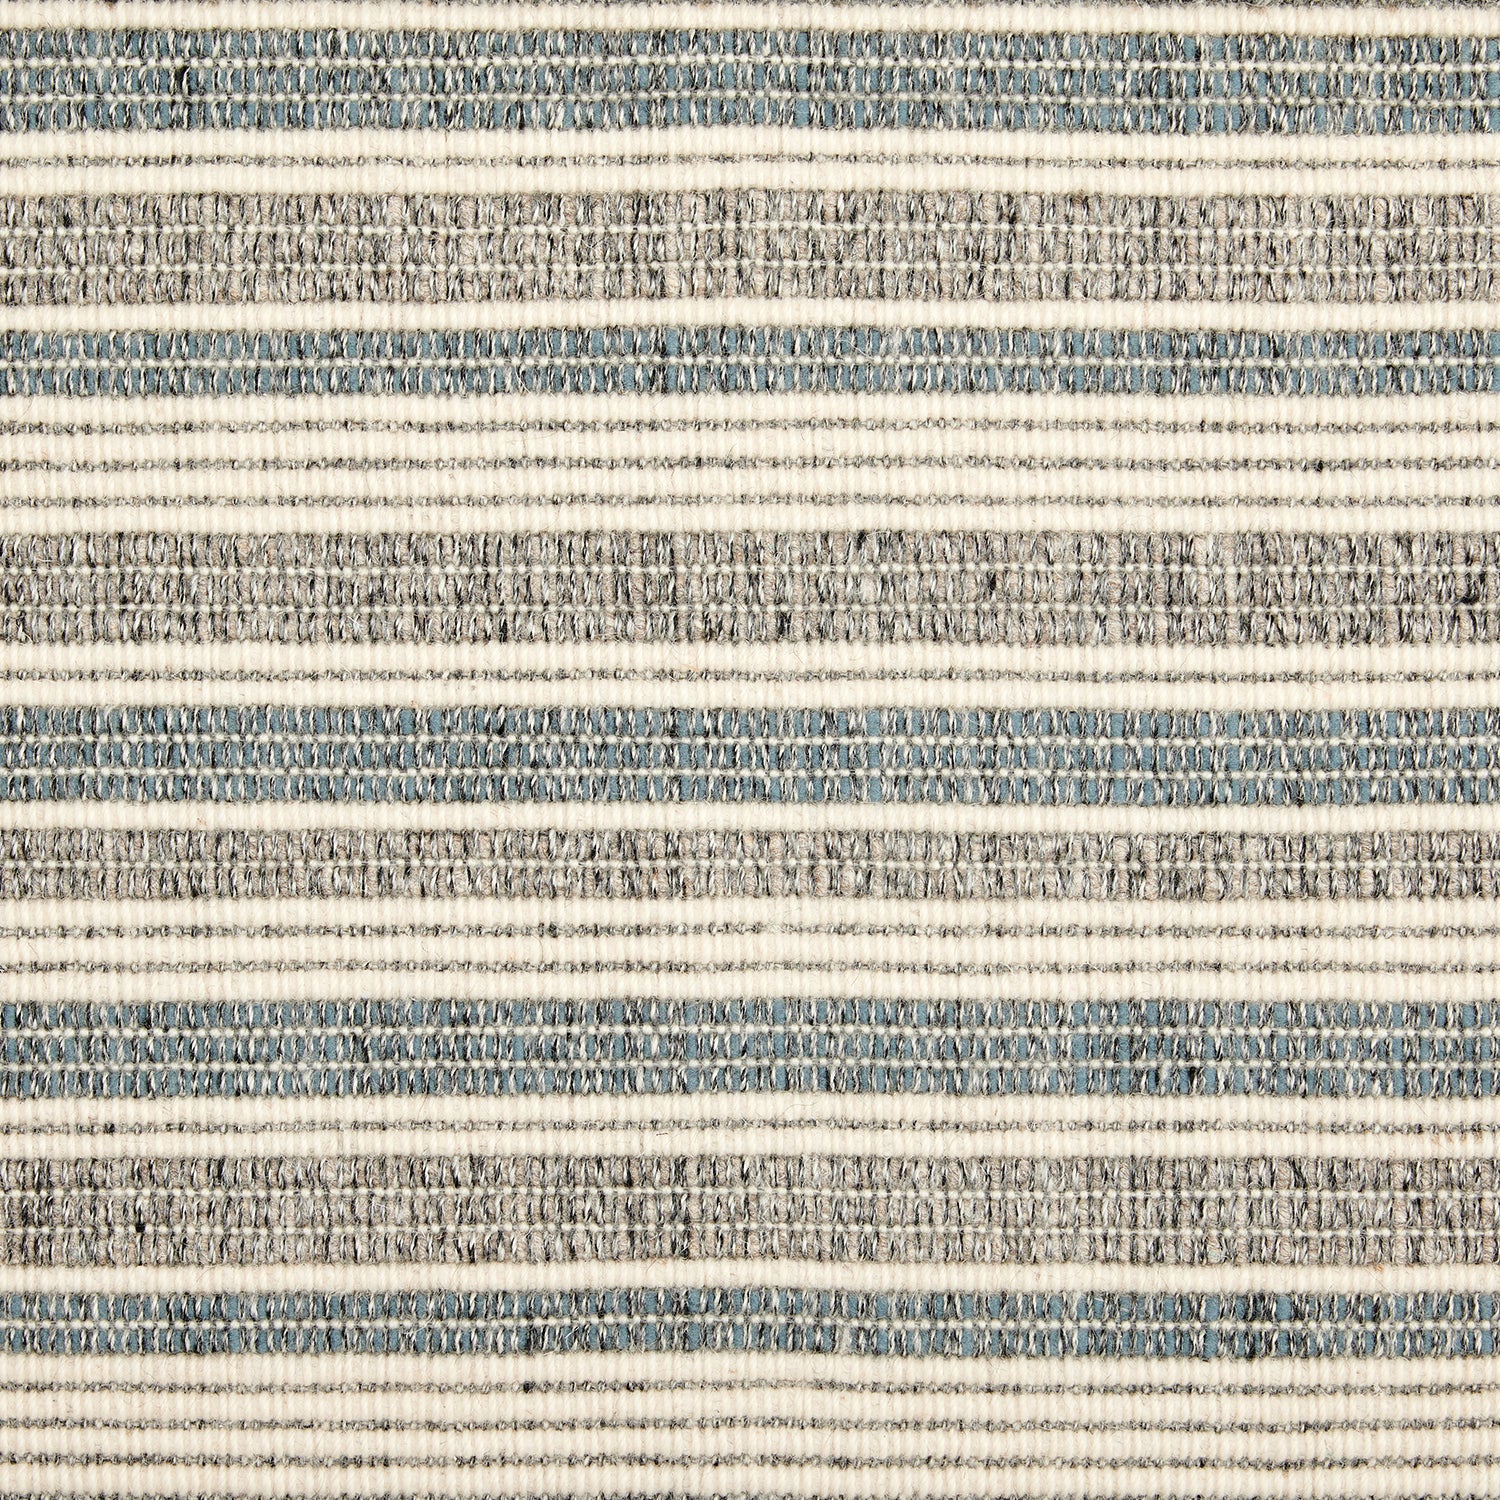 Wool broadloom carpet swatch in a ribbed stripe weave in gray, blue and cream.